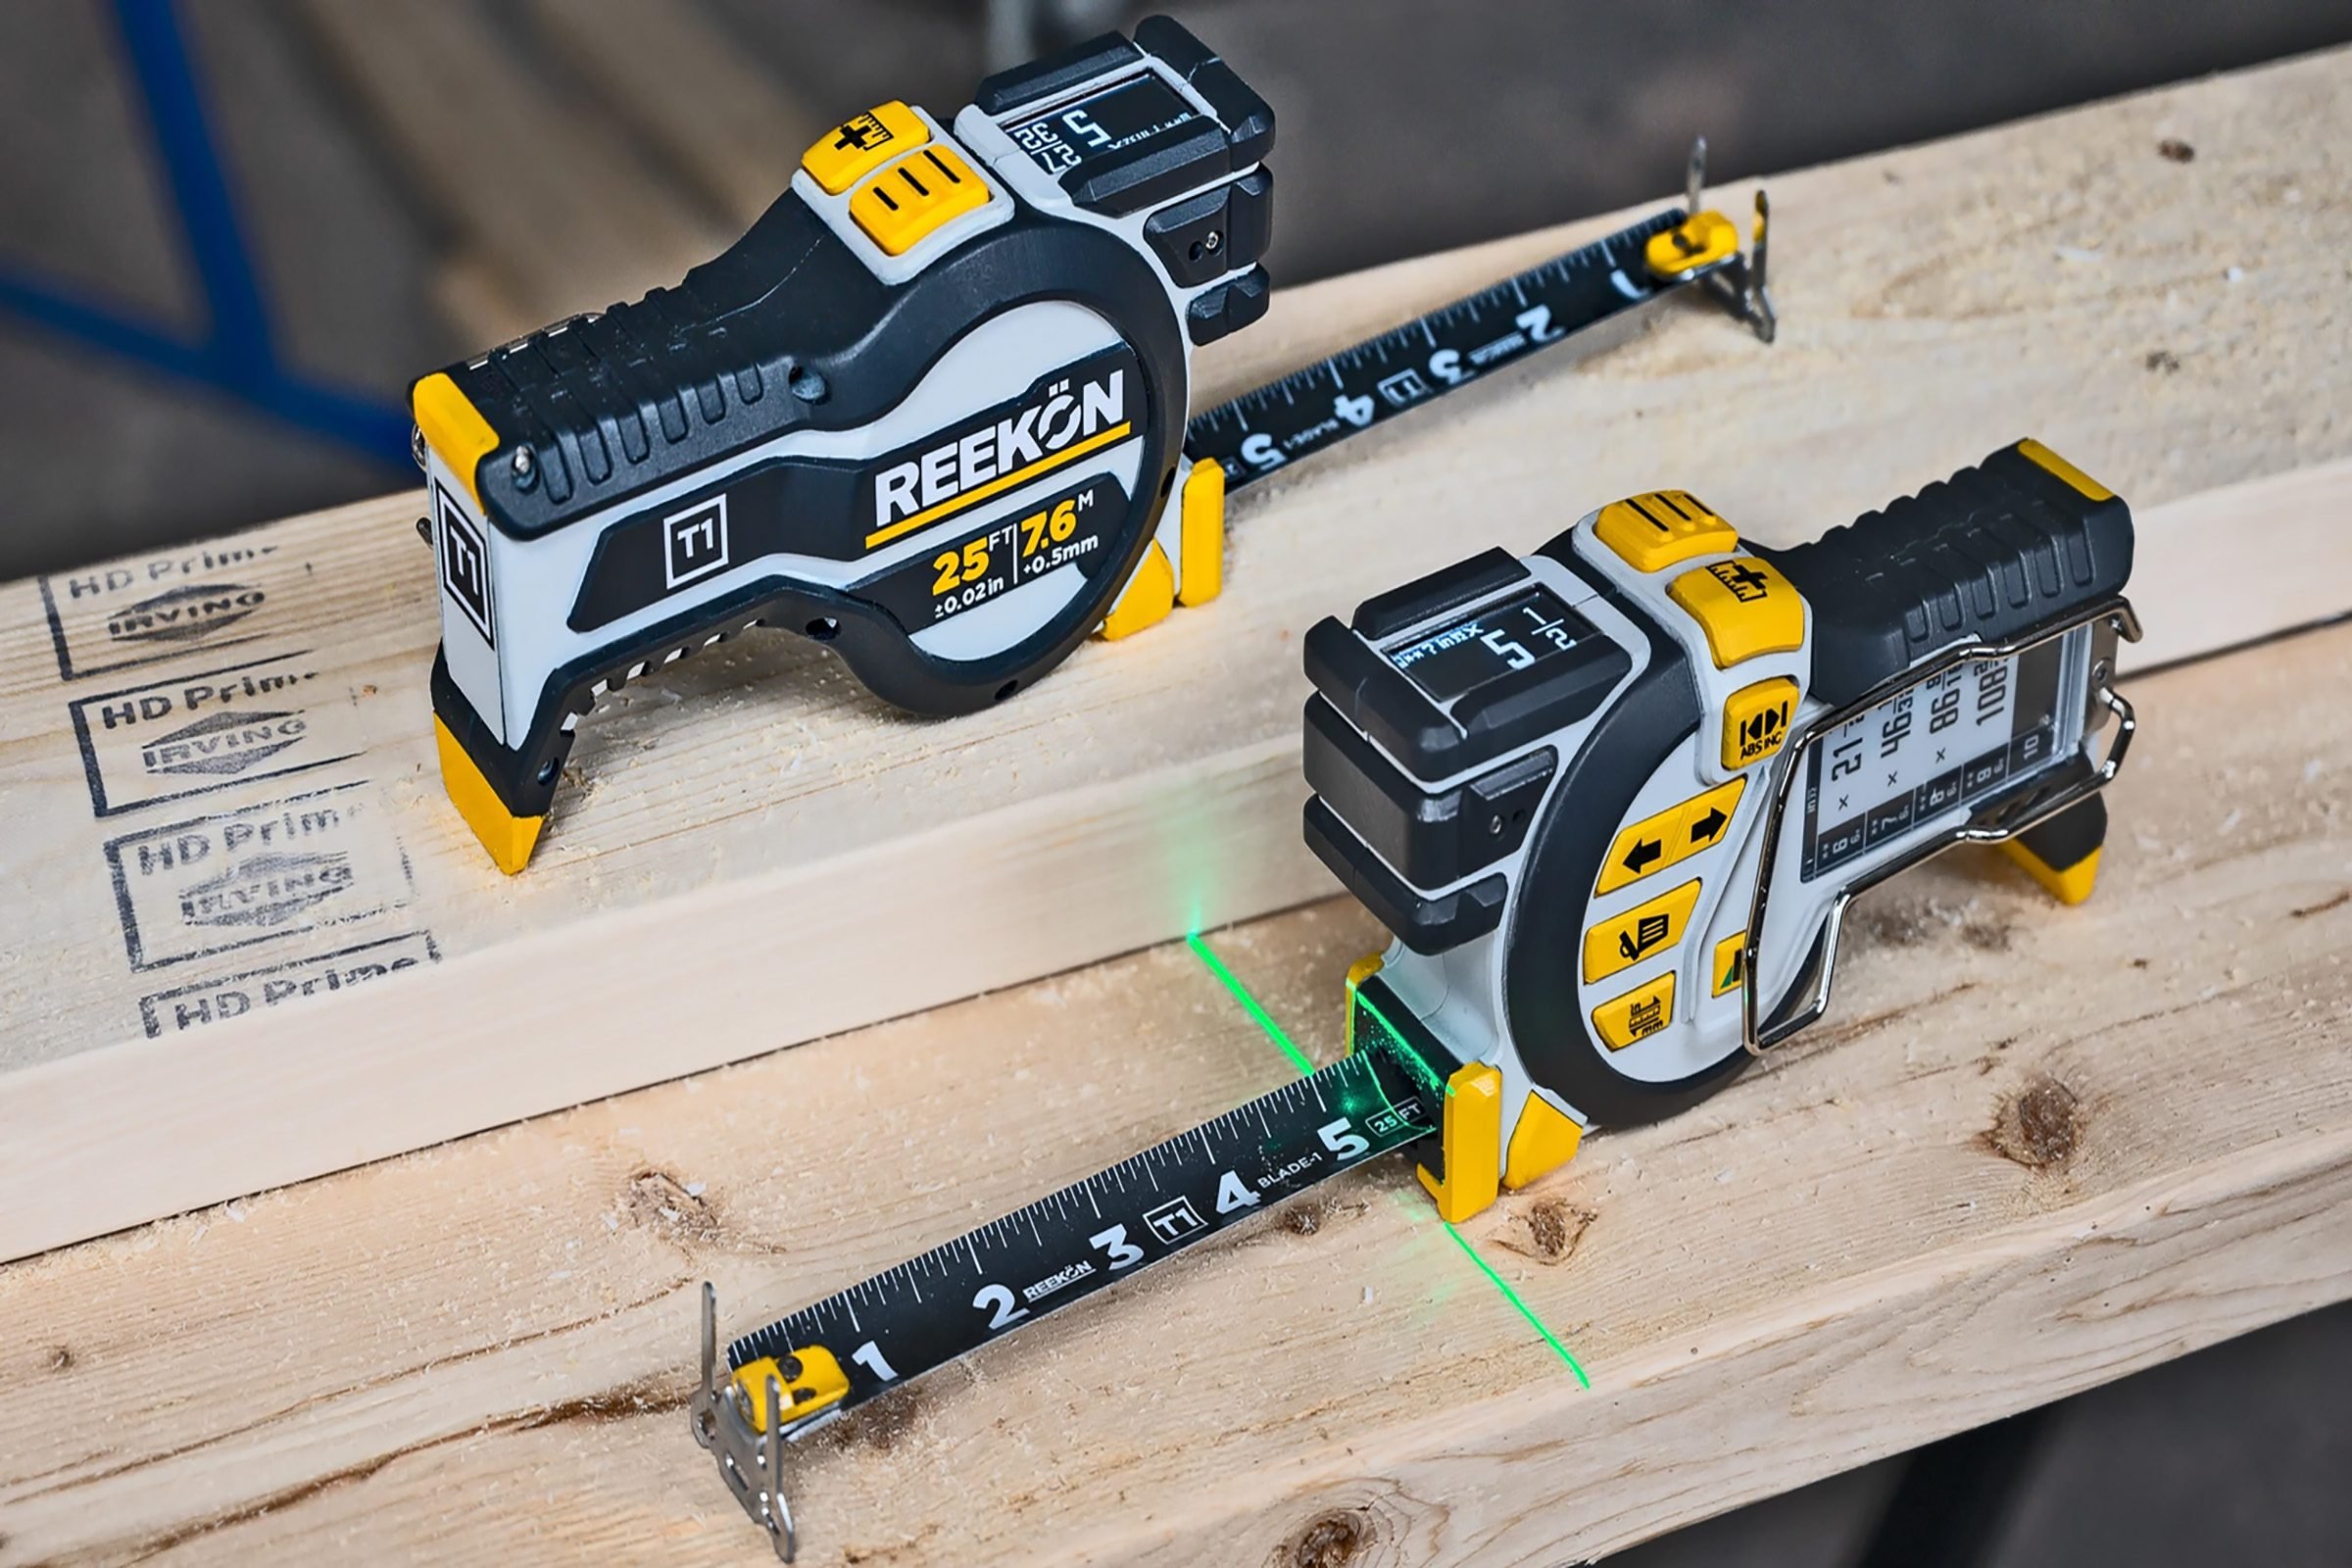 Next-Generation Bluetooth Enabled Digital Tape Measure Launched – Metrology  and Quality News - Online Magazine